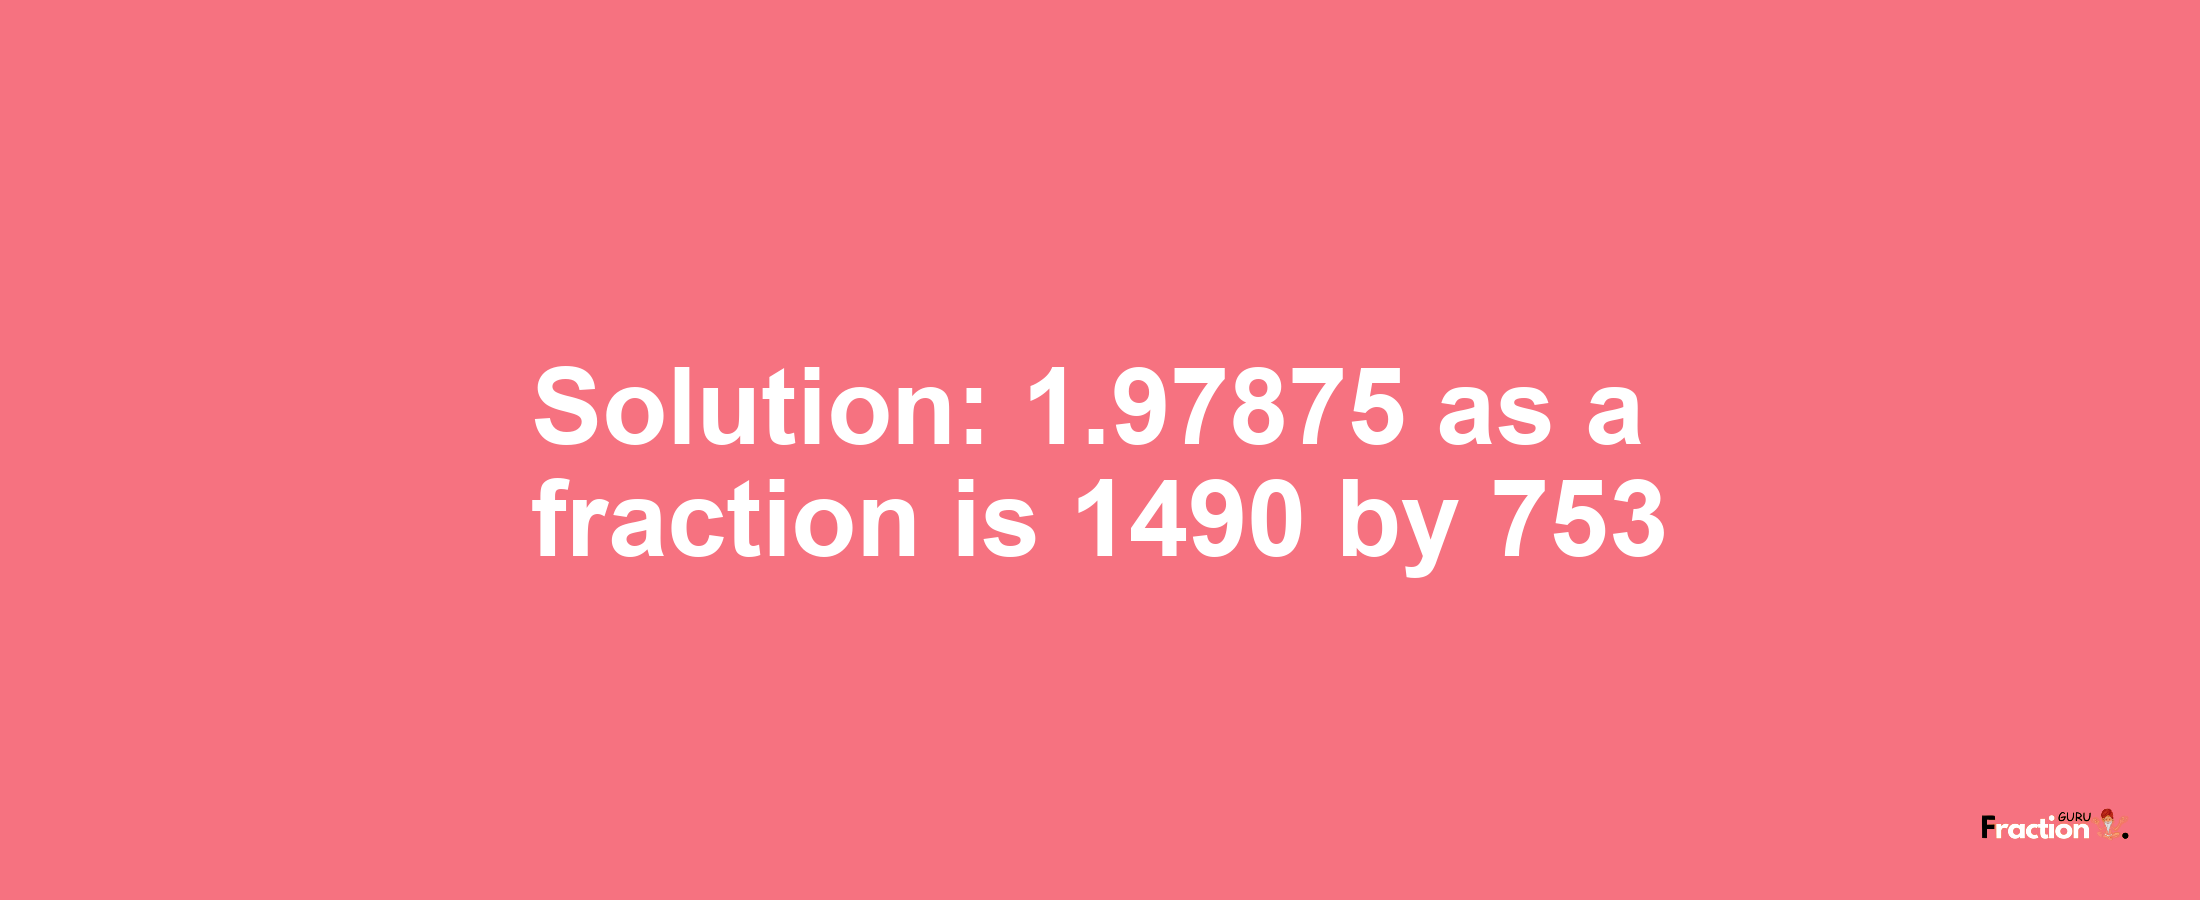 Solution:1.97875 as a fraction is 1490/753